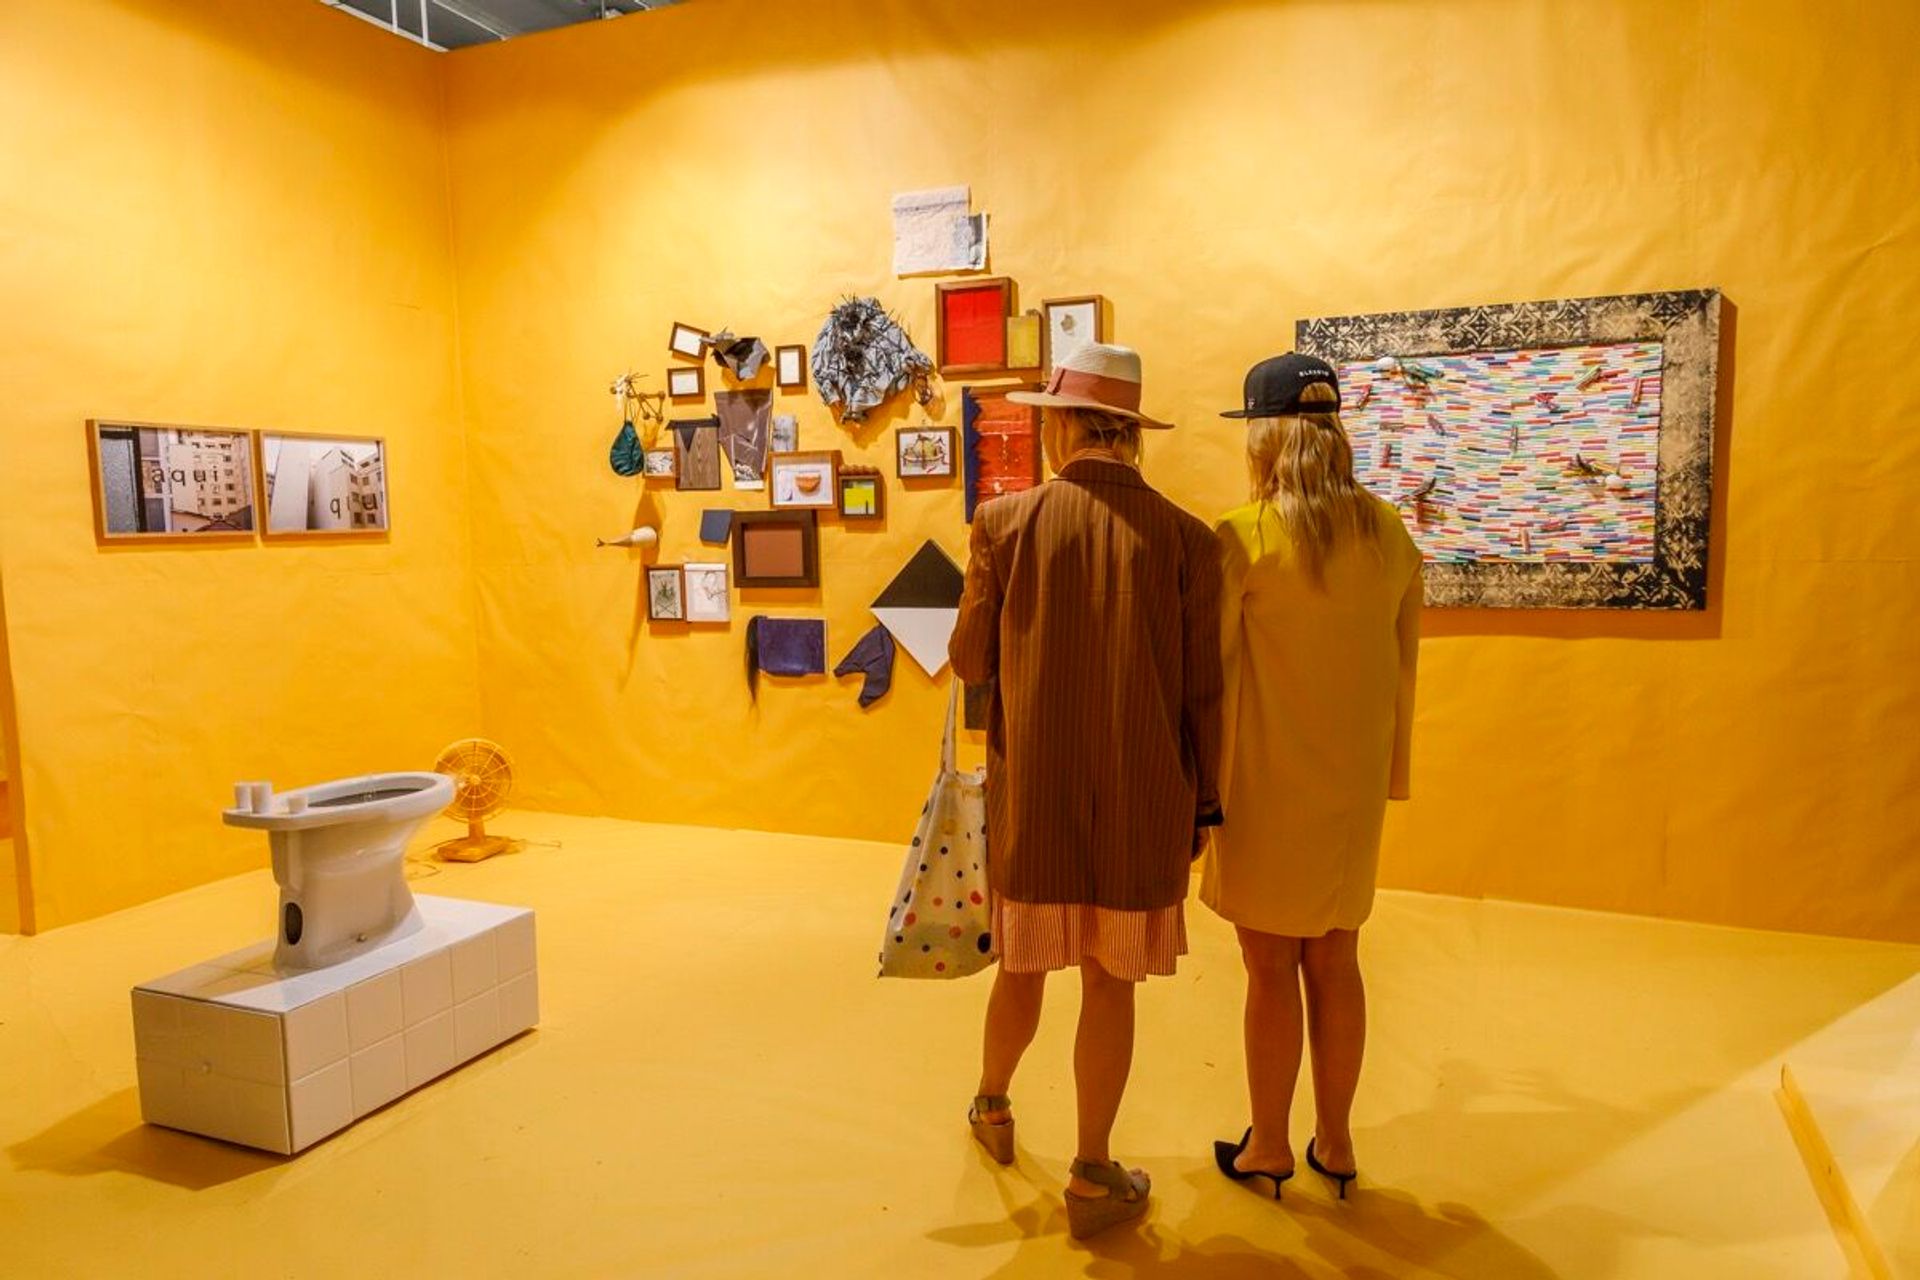 Installation view of A Gentil Carioca’s booth at Art Basel, 2019. Courtesy of Art Basel.